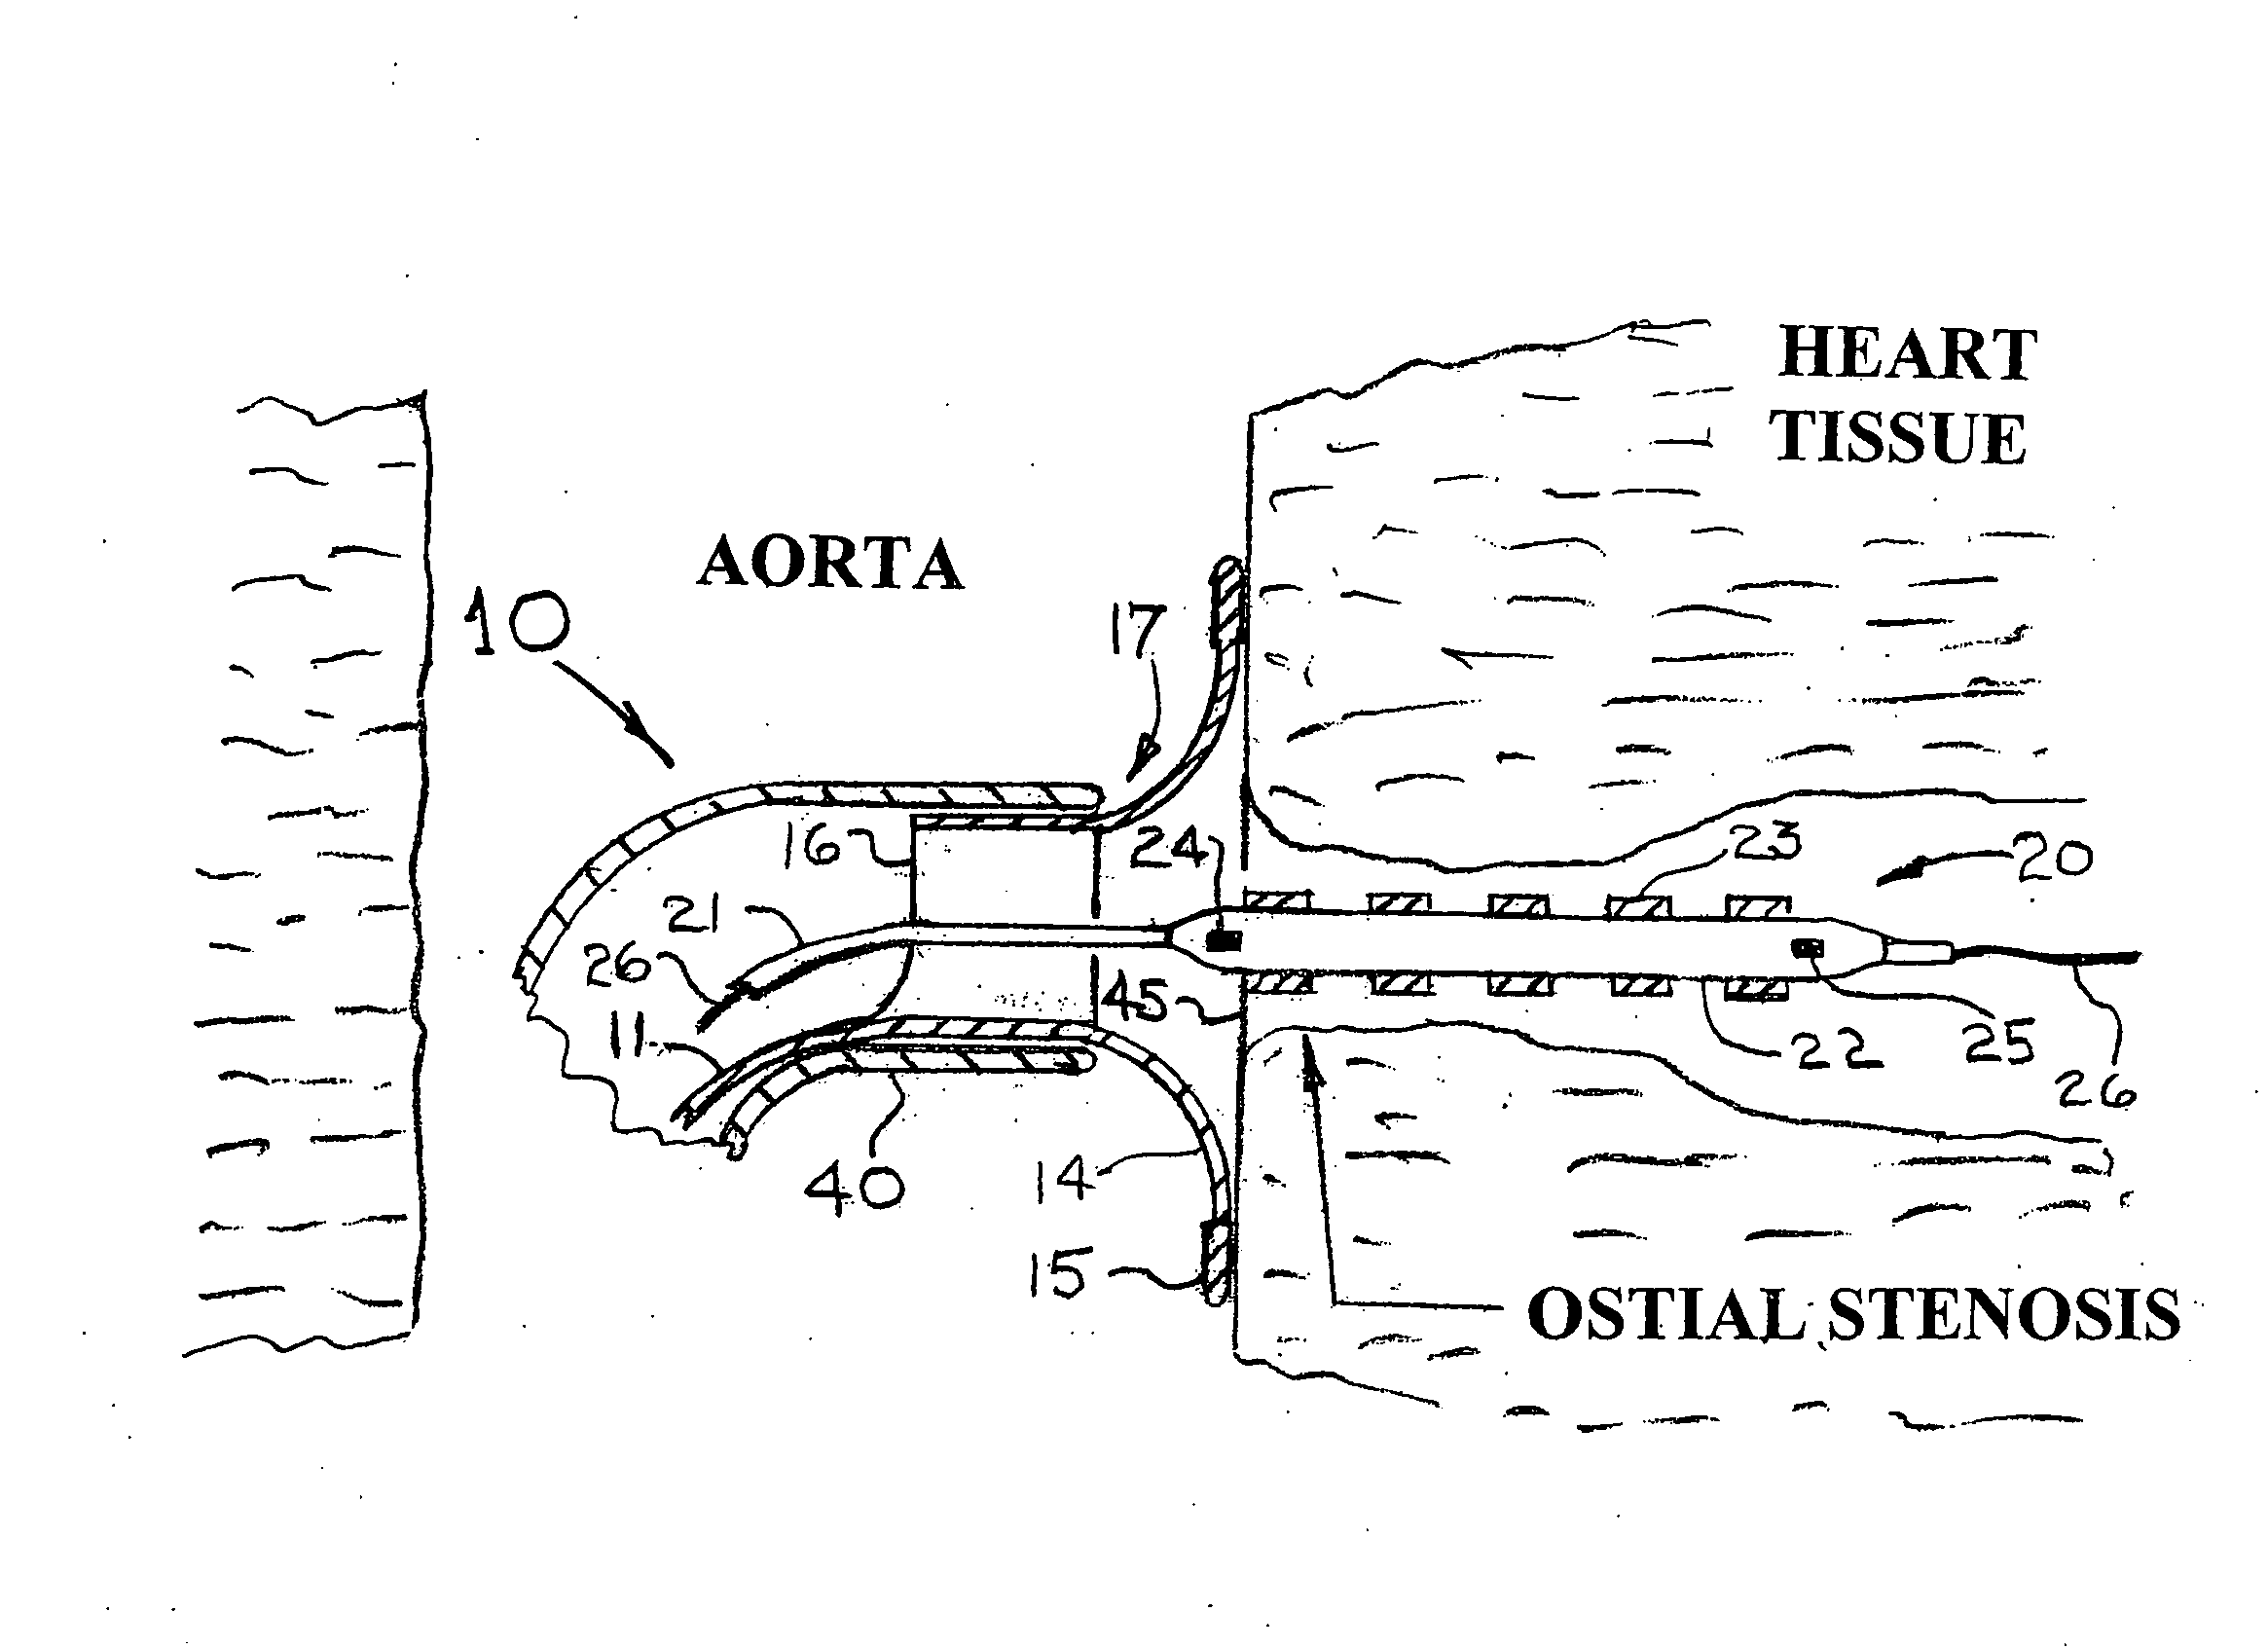 Introducer sheath for the placement of a stent at the ostium of an artery